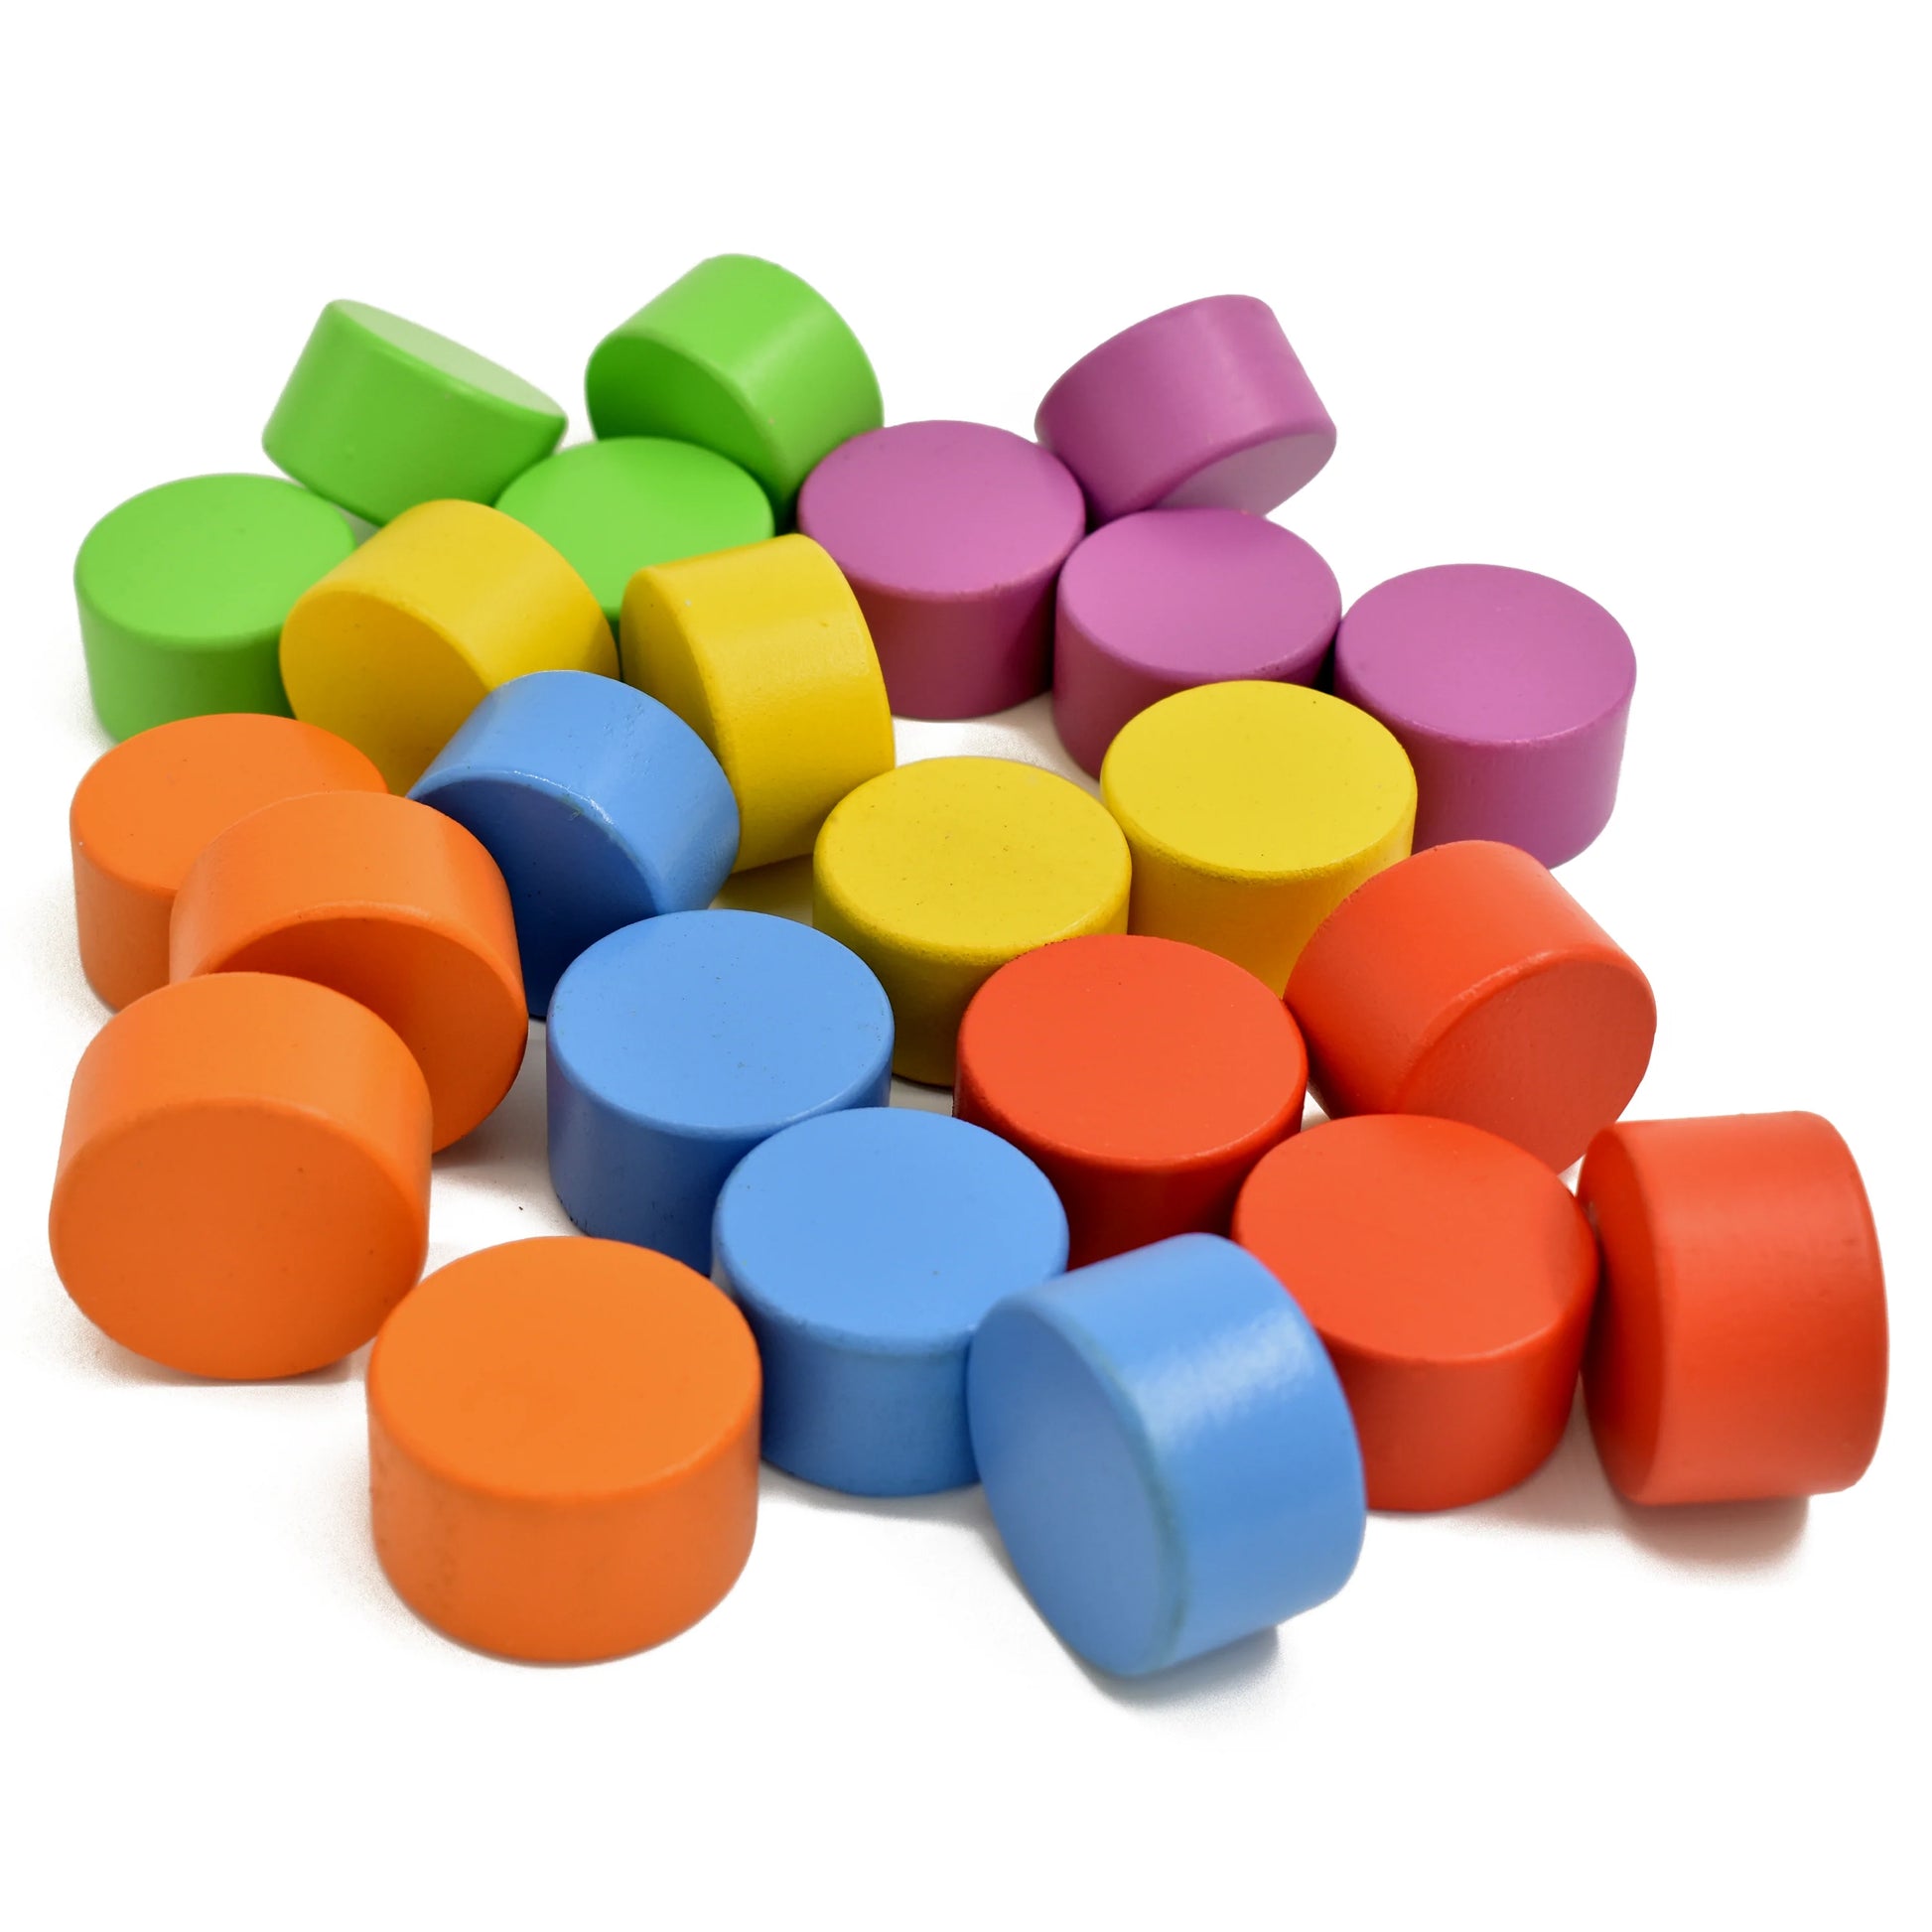 Buy Round Wooden Block Play Toy - SkilloToys.com